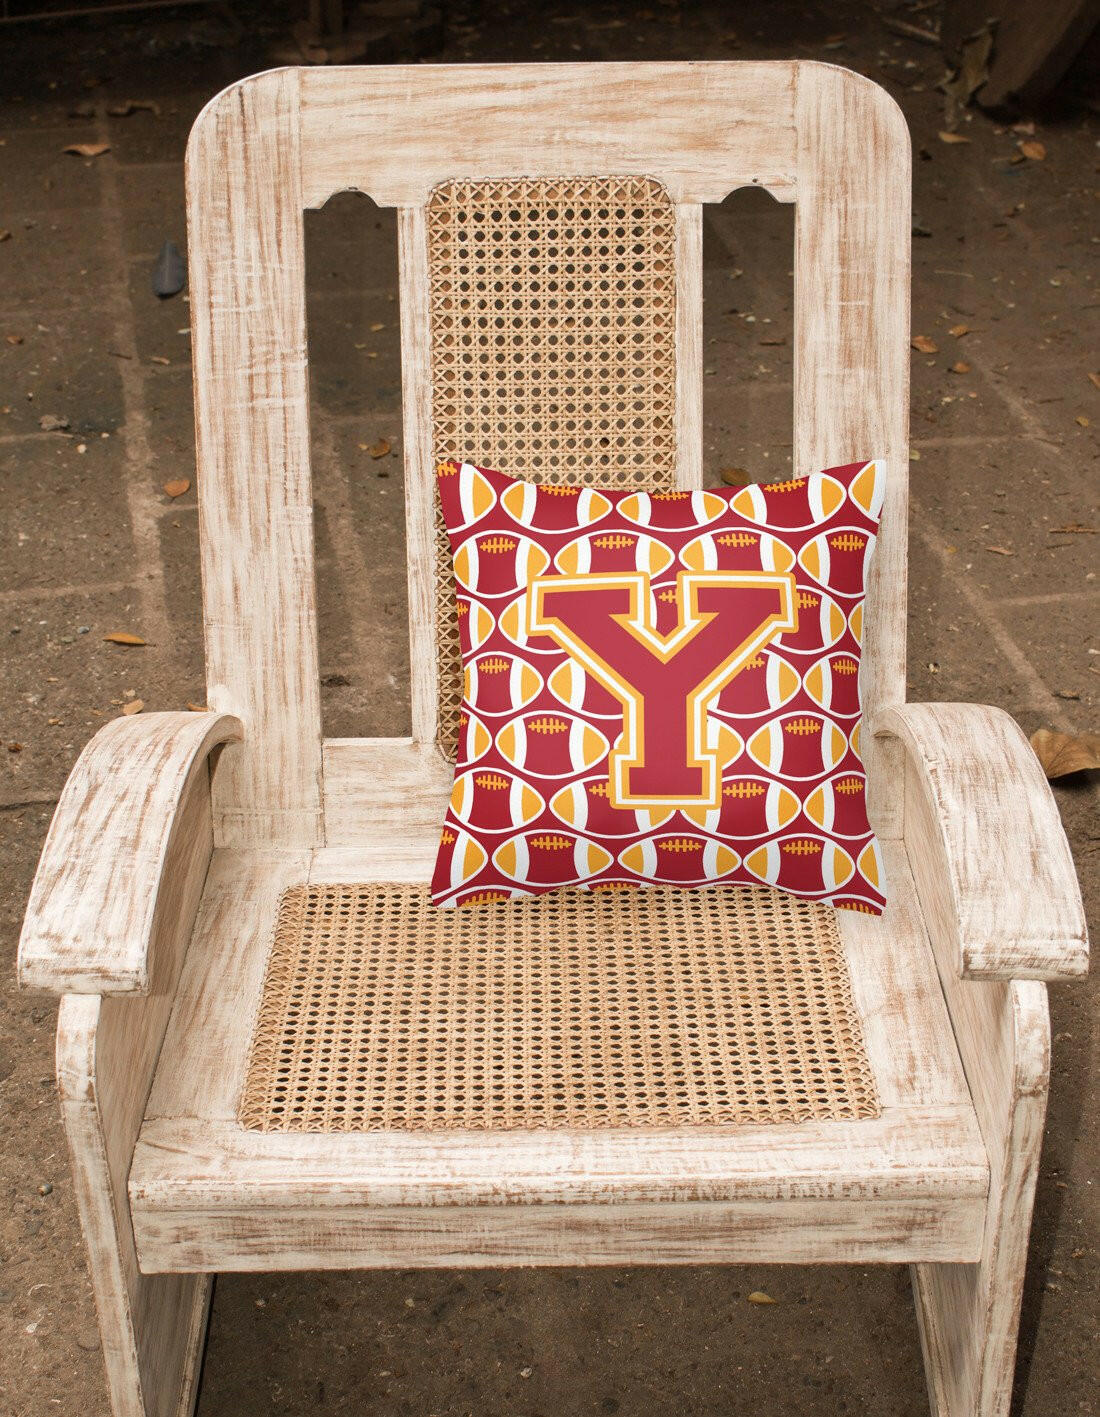 Letter Y Football Cardinal and Gold Fabric Decorative Pillow CJ1070-YPW1414 by Caroline's Treasures